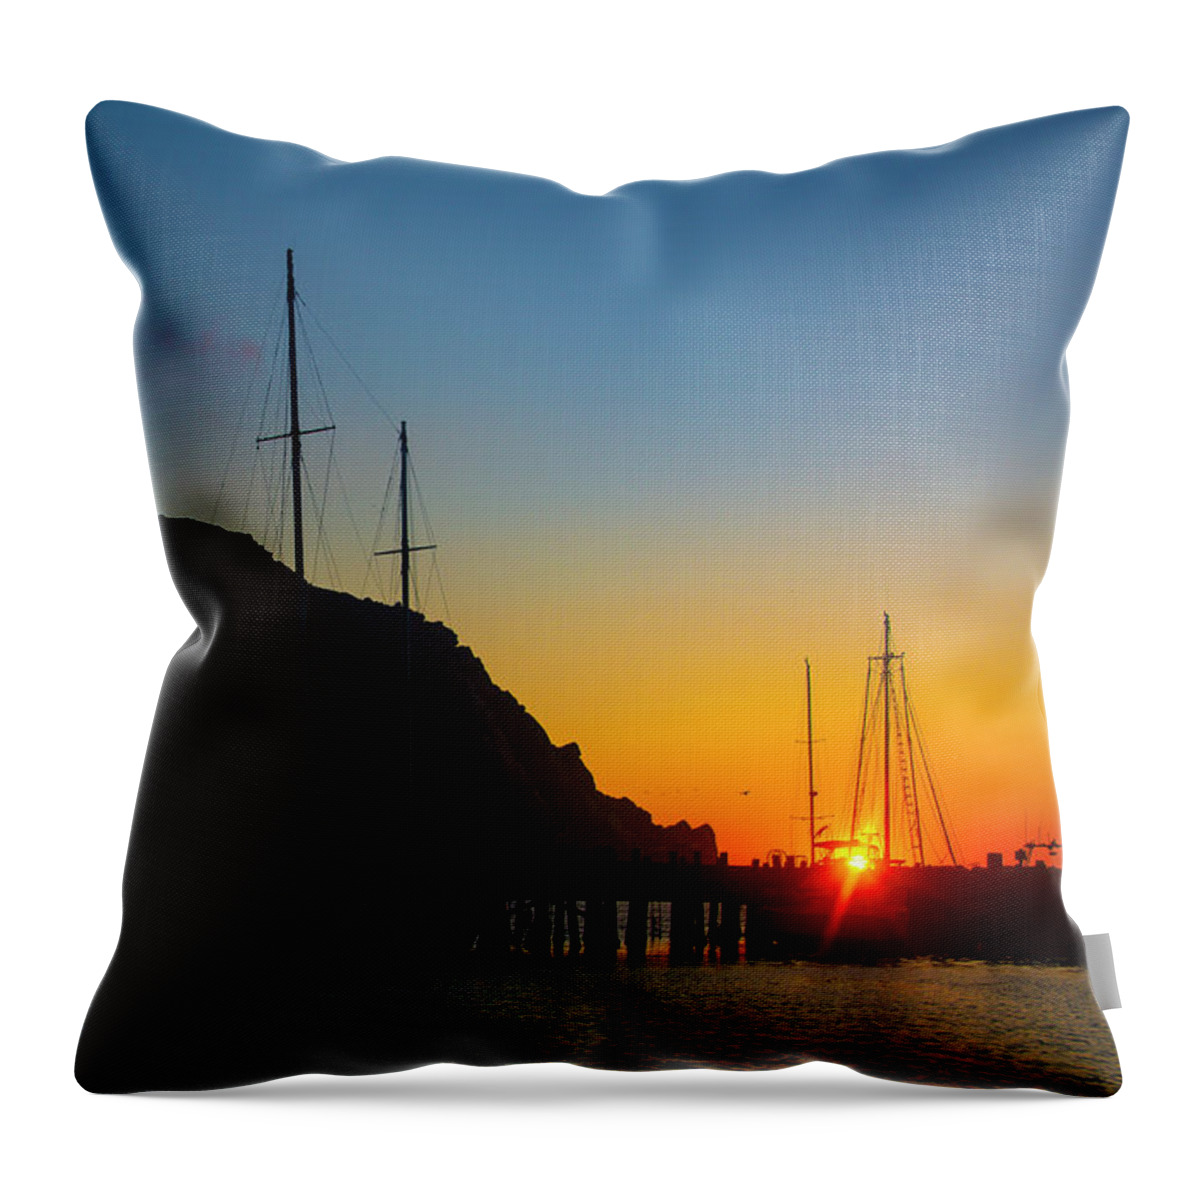 Sunset Morro Bay Throw Pillow featuring the photograph Morro Bay Rock by Garry Gay